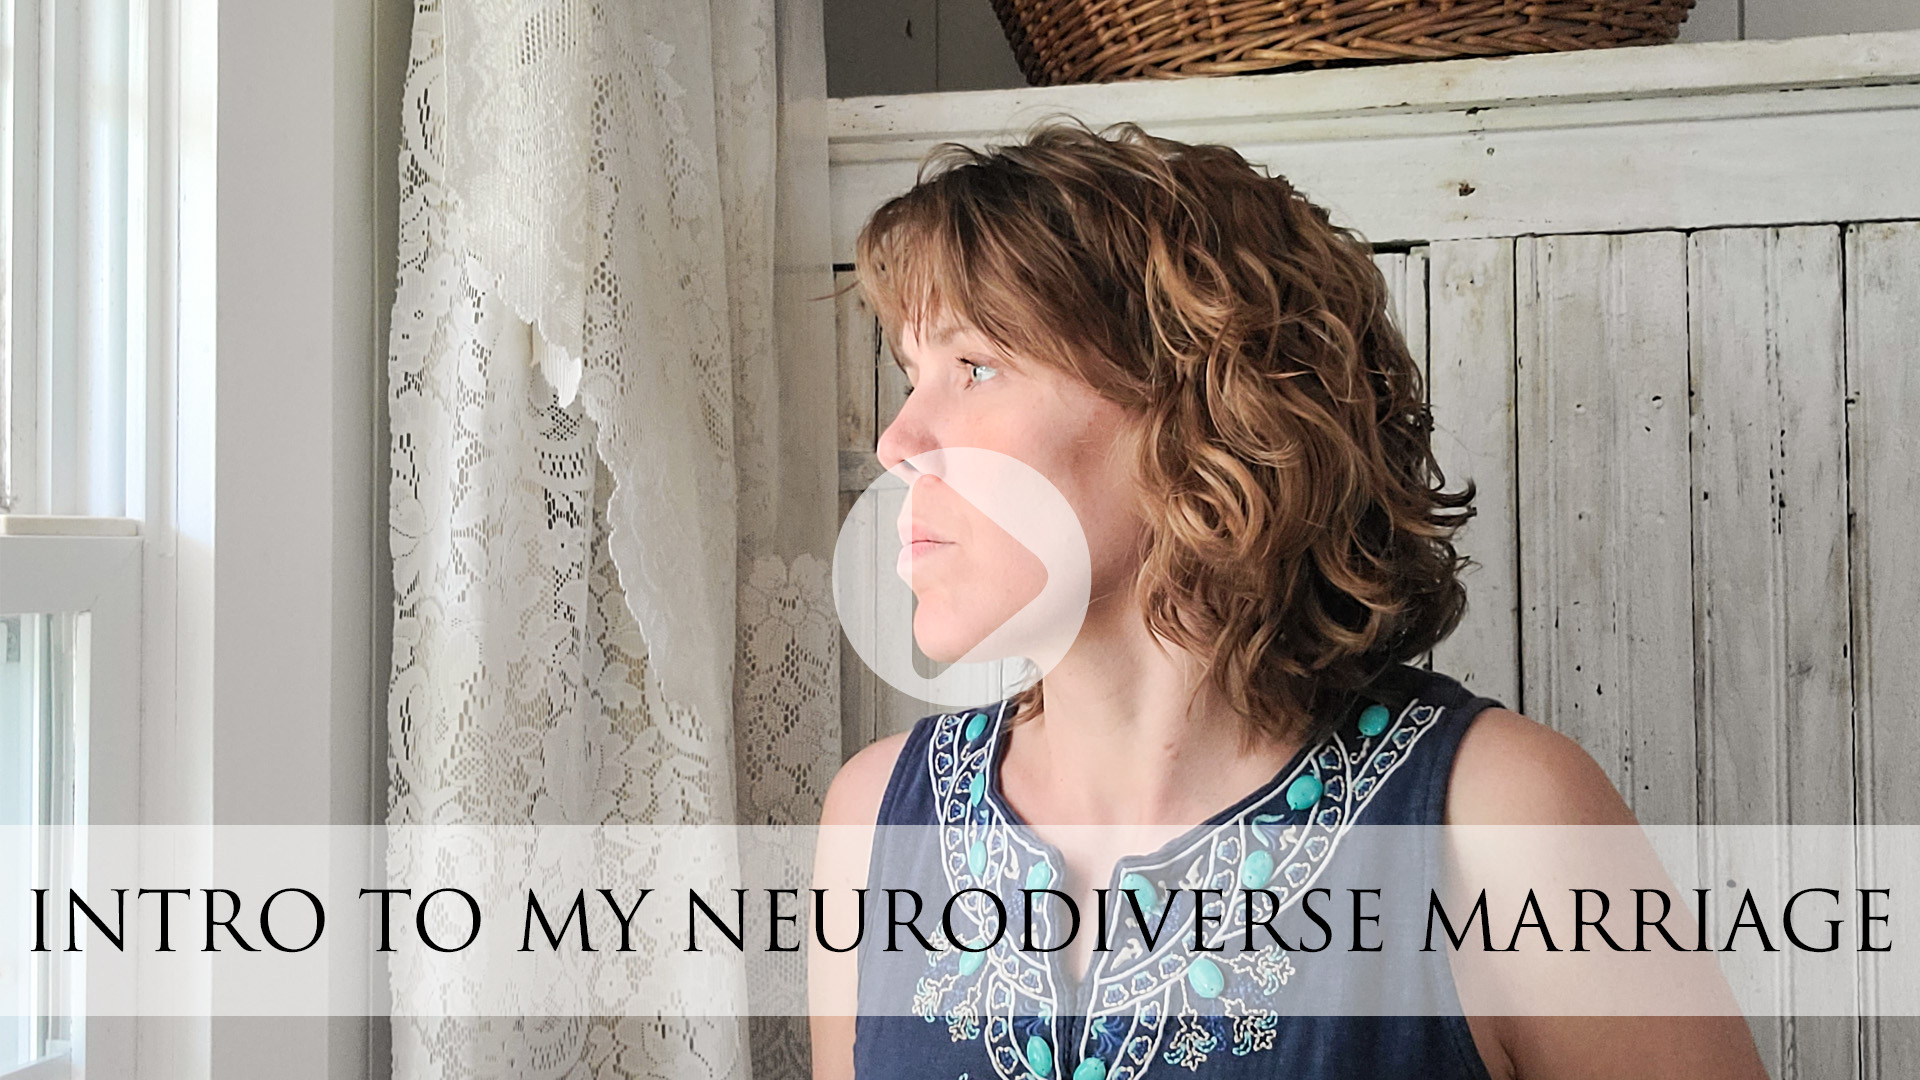 Vlog about the Intro to My Neurodiverse Marriage | prodigalpieces.com #prodigalpieces